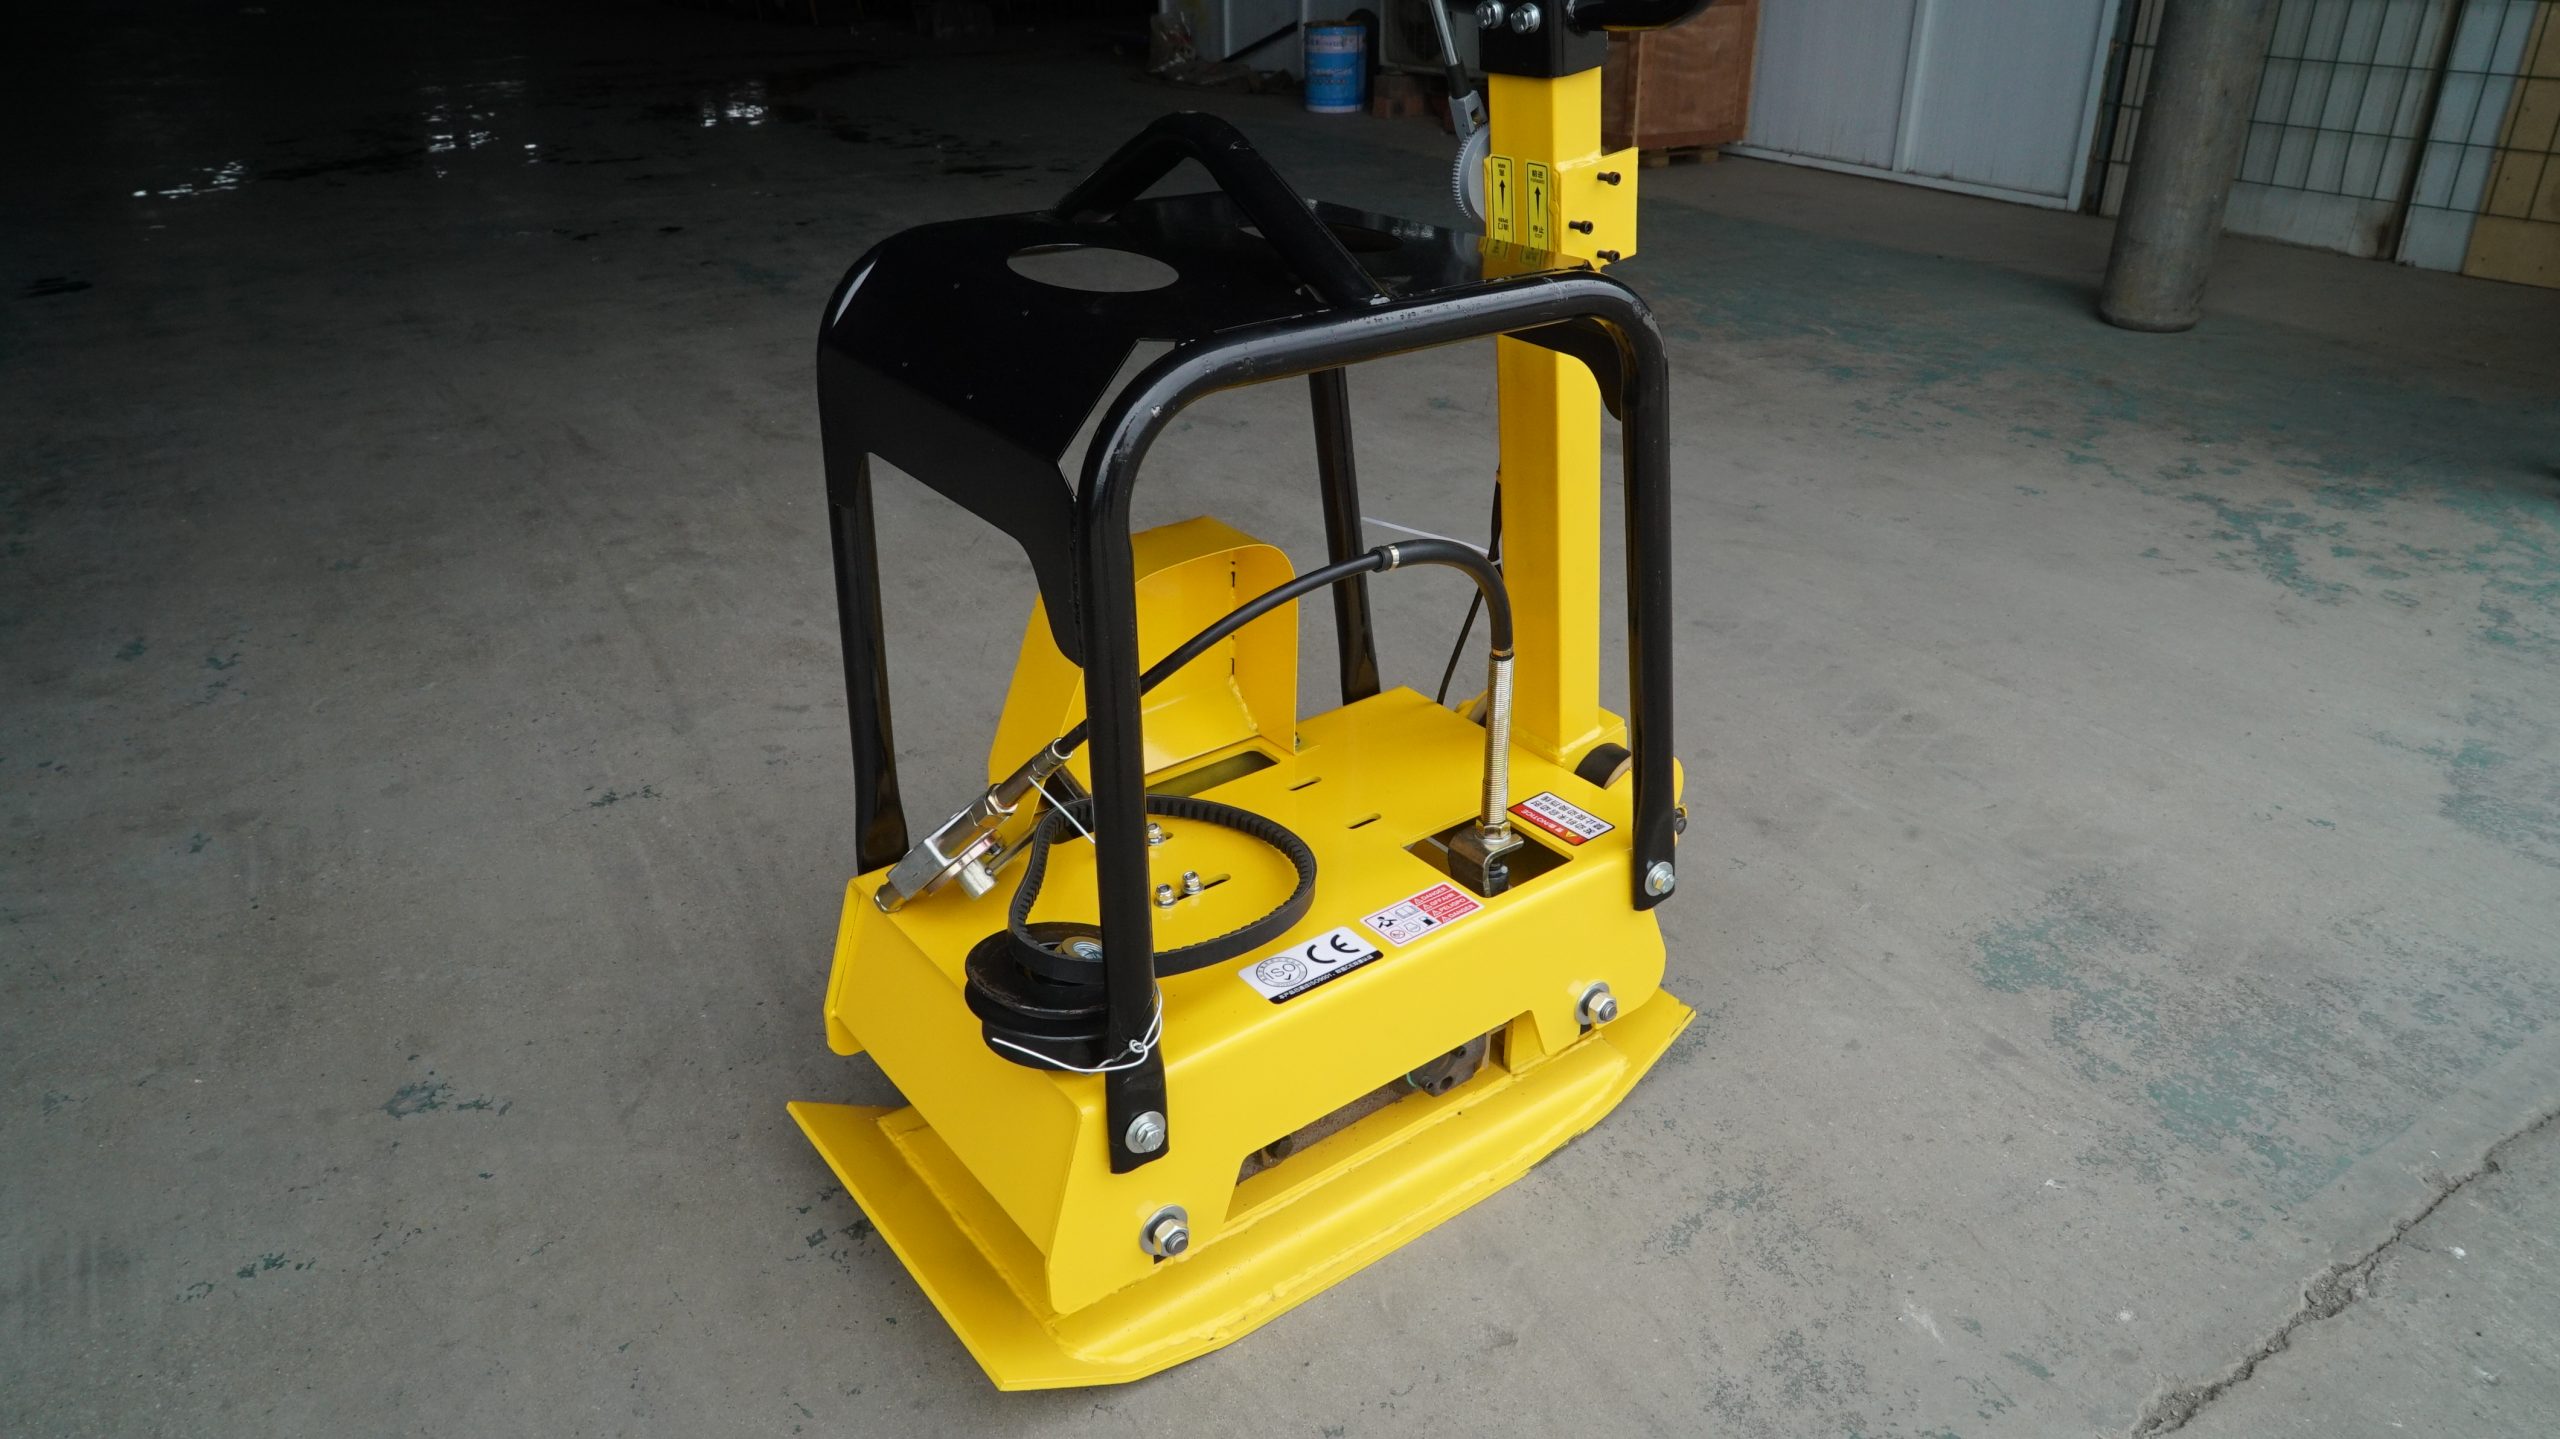 https://californiatoolsandequipment.com/blogs/news/everything-construction-vibrating-plate-compactors-buying-guide